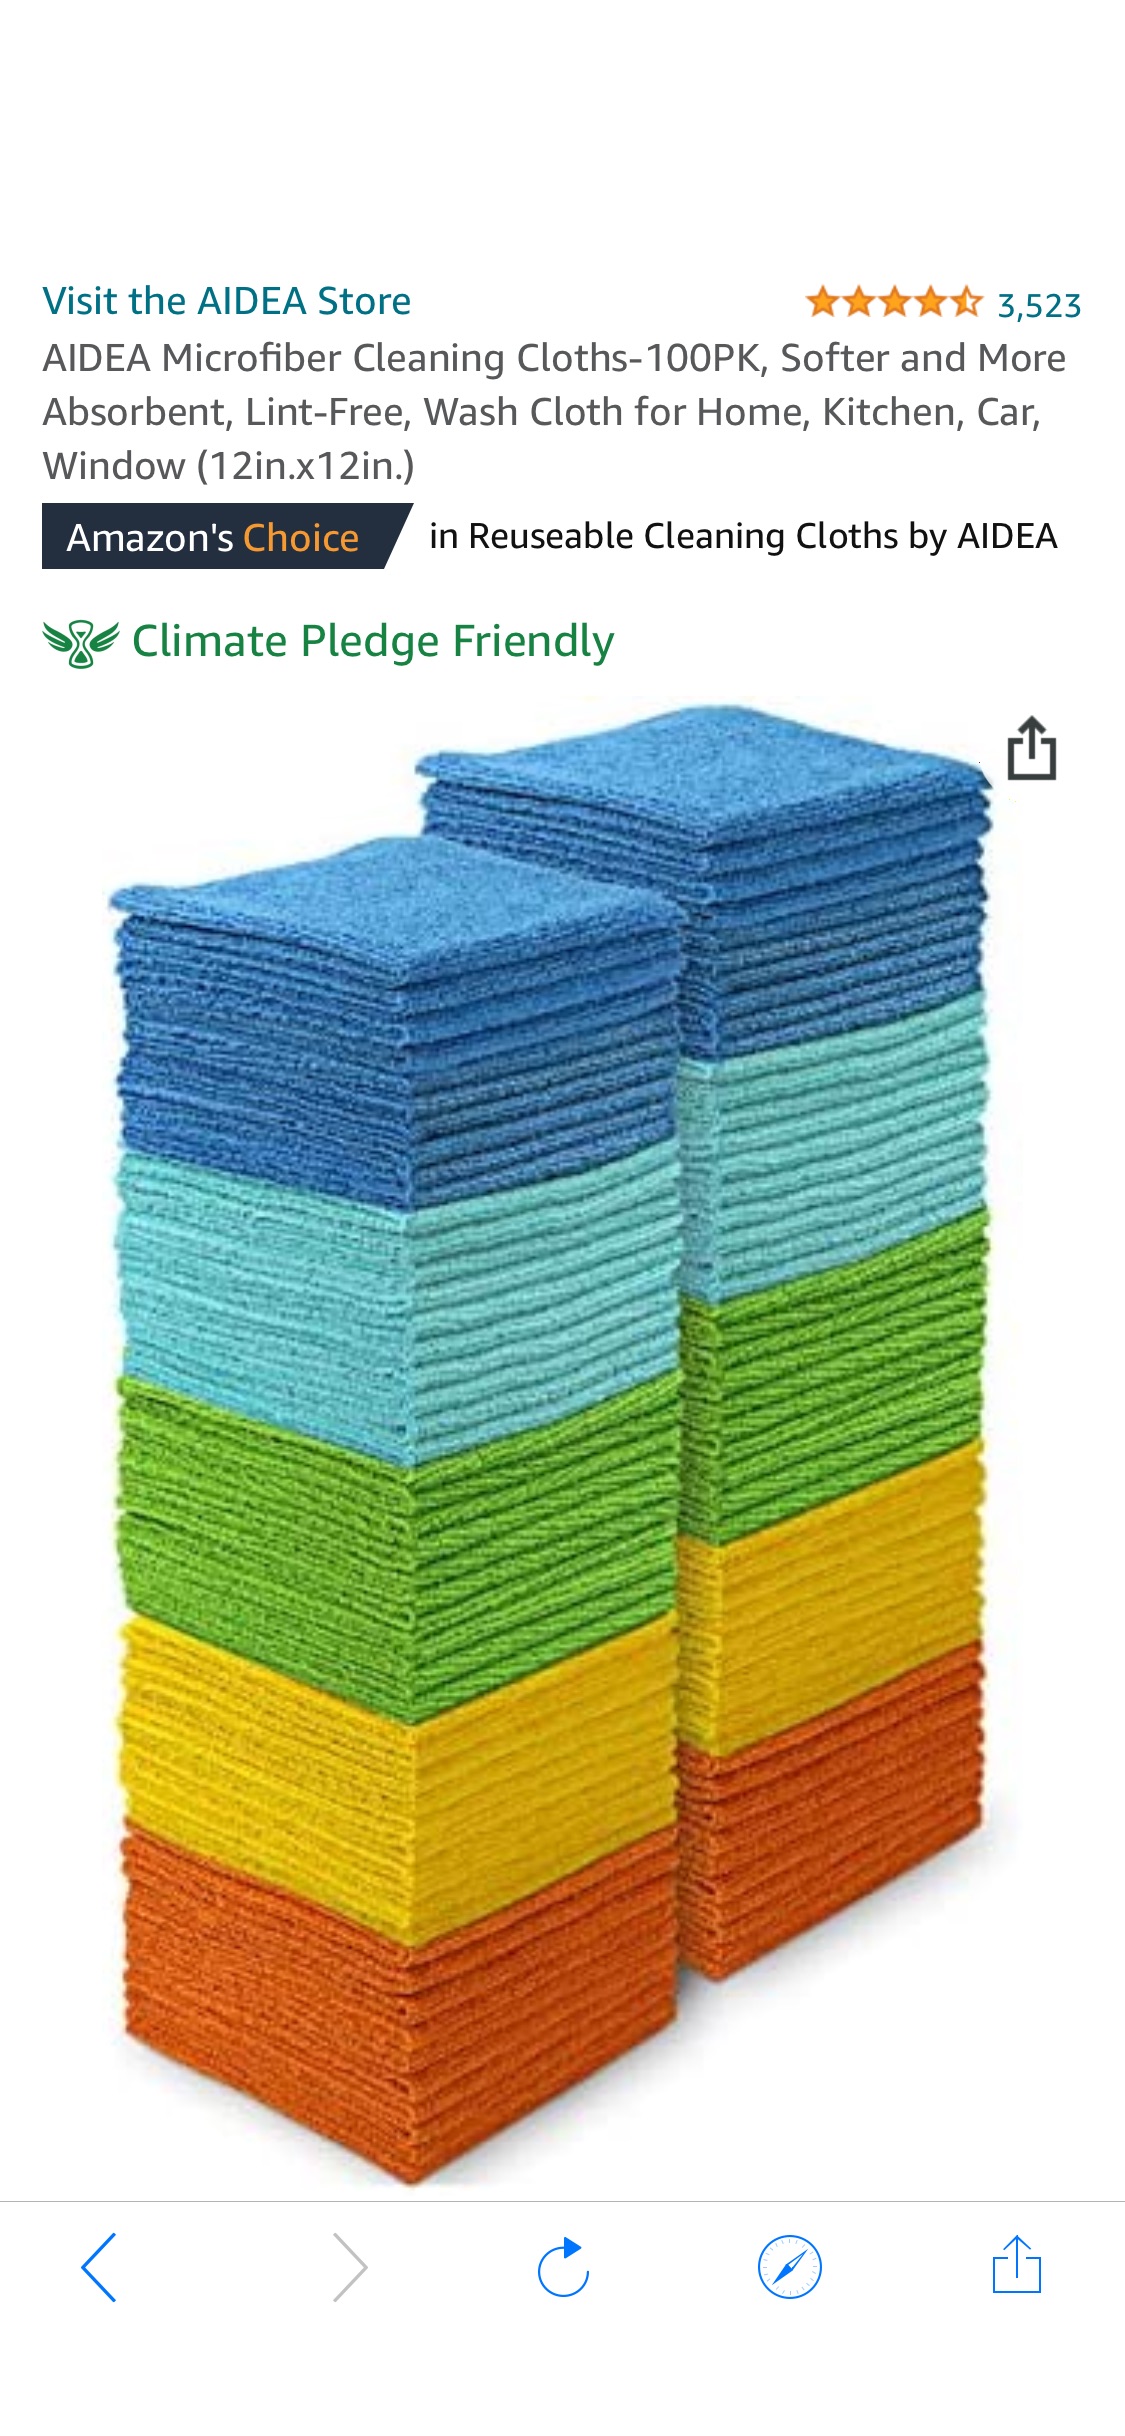 Amazon.com: AIDEA Microfiber Cleaning Cloths-100PK, Softer and More Absorbent, Lint-Free, Wash Cloth for Home, Kitchen, Car, Window (12in.x12in.) :清洁布